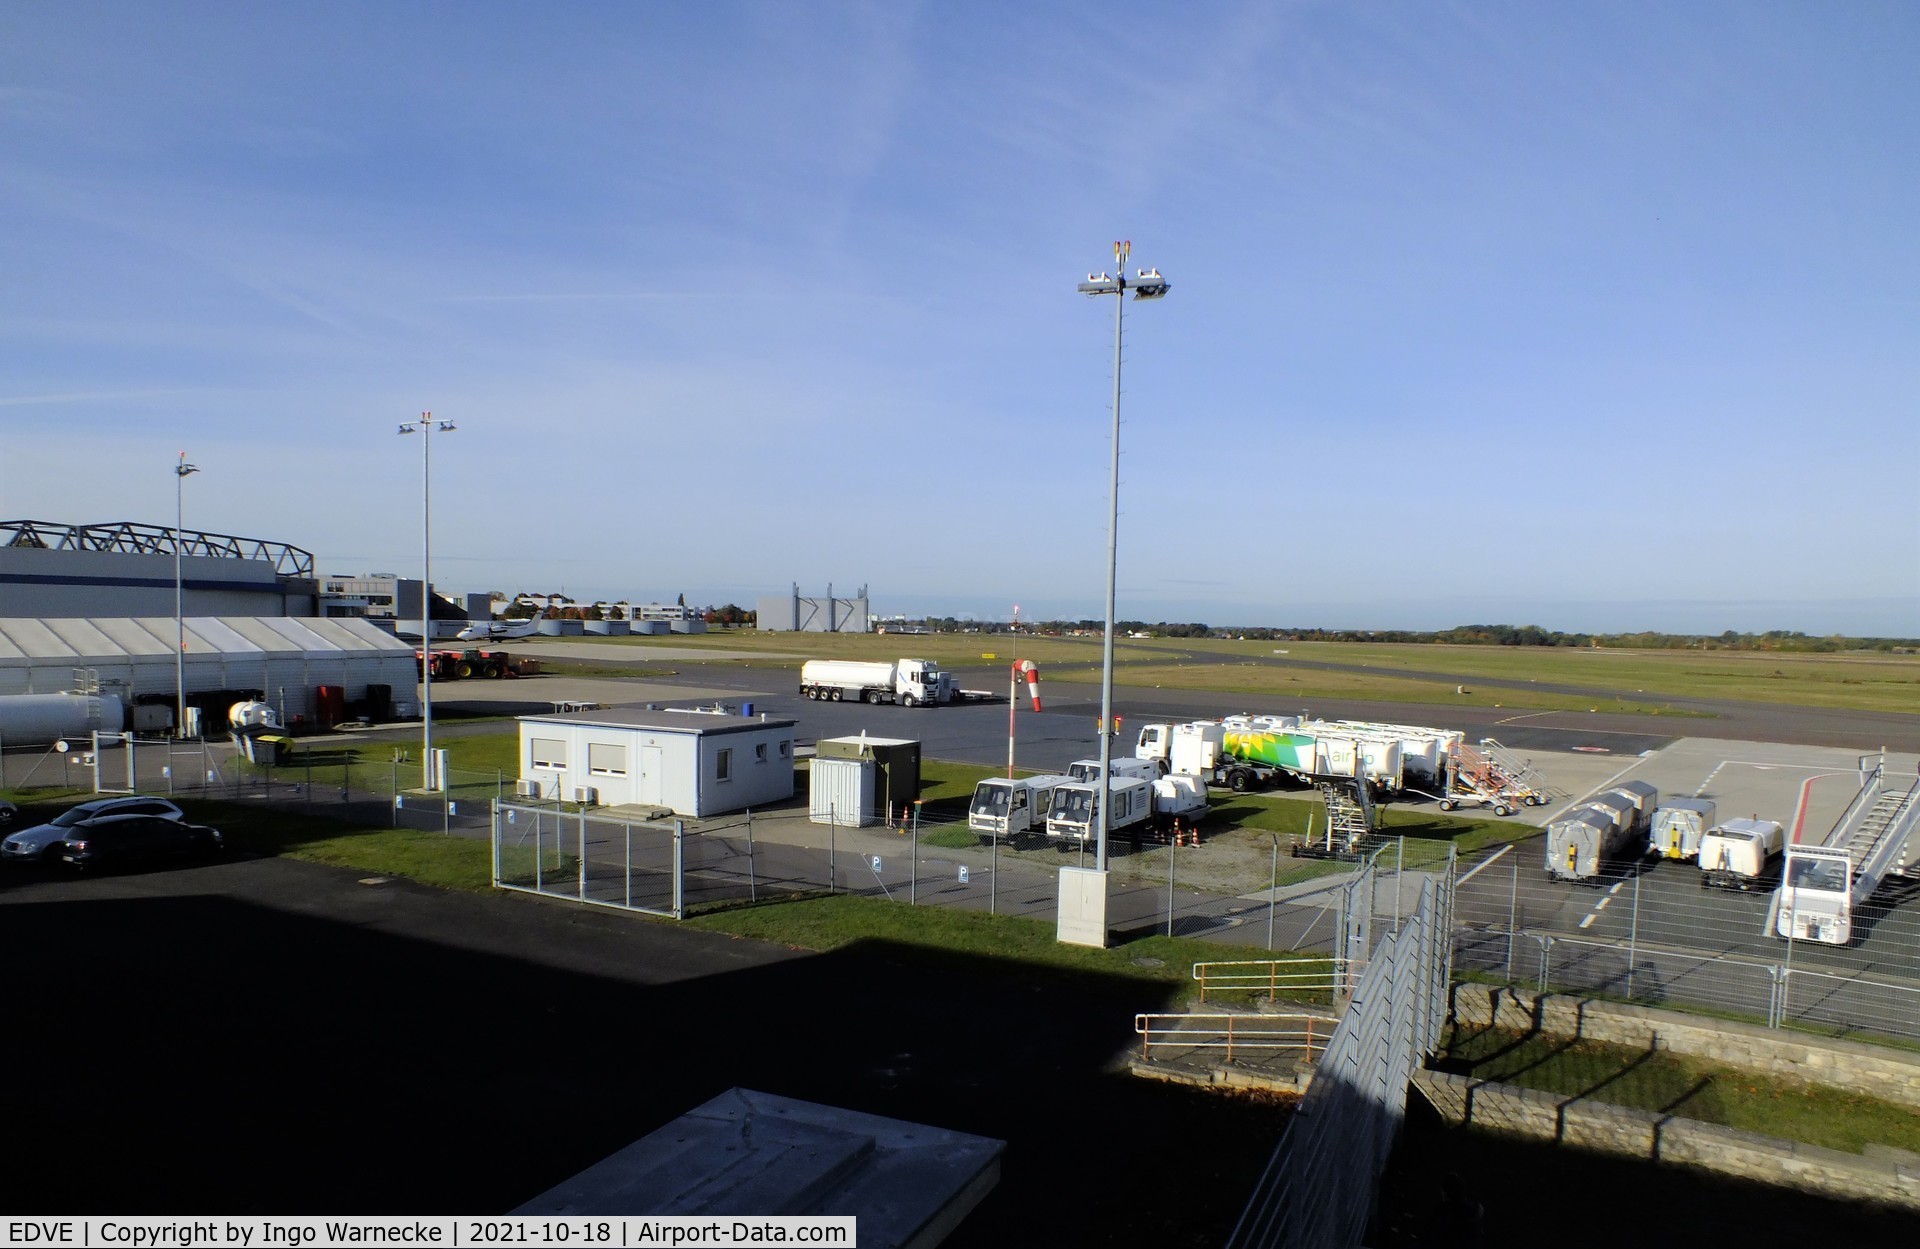 Braunschweig-Wolfsburg Regional Airport, Braunschweig, Lower Saxony Germany (EDVE) - looking west from the visitors gallery at the apron at Braunschweig-Waggum airport